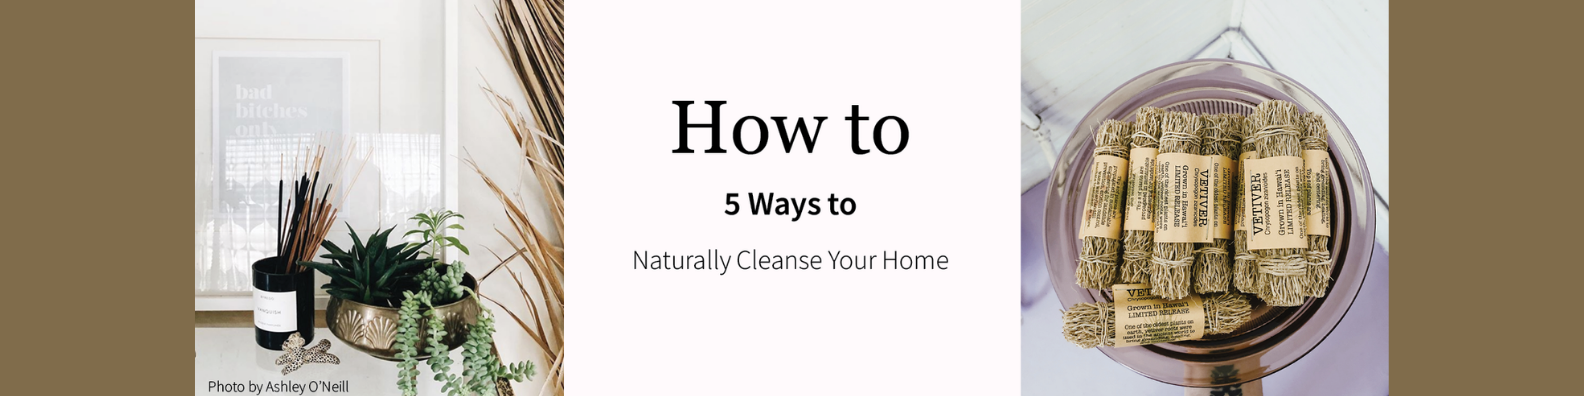 5 Ways to Cleanse Your Home Naturally